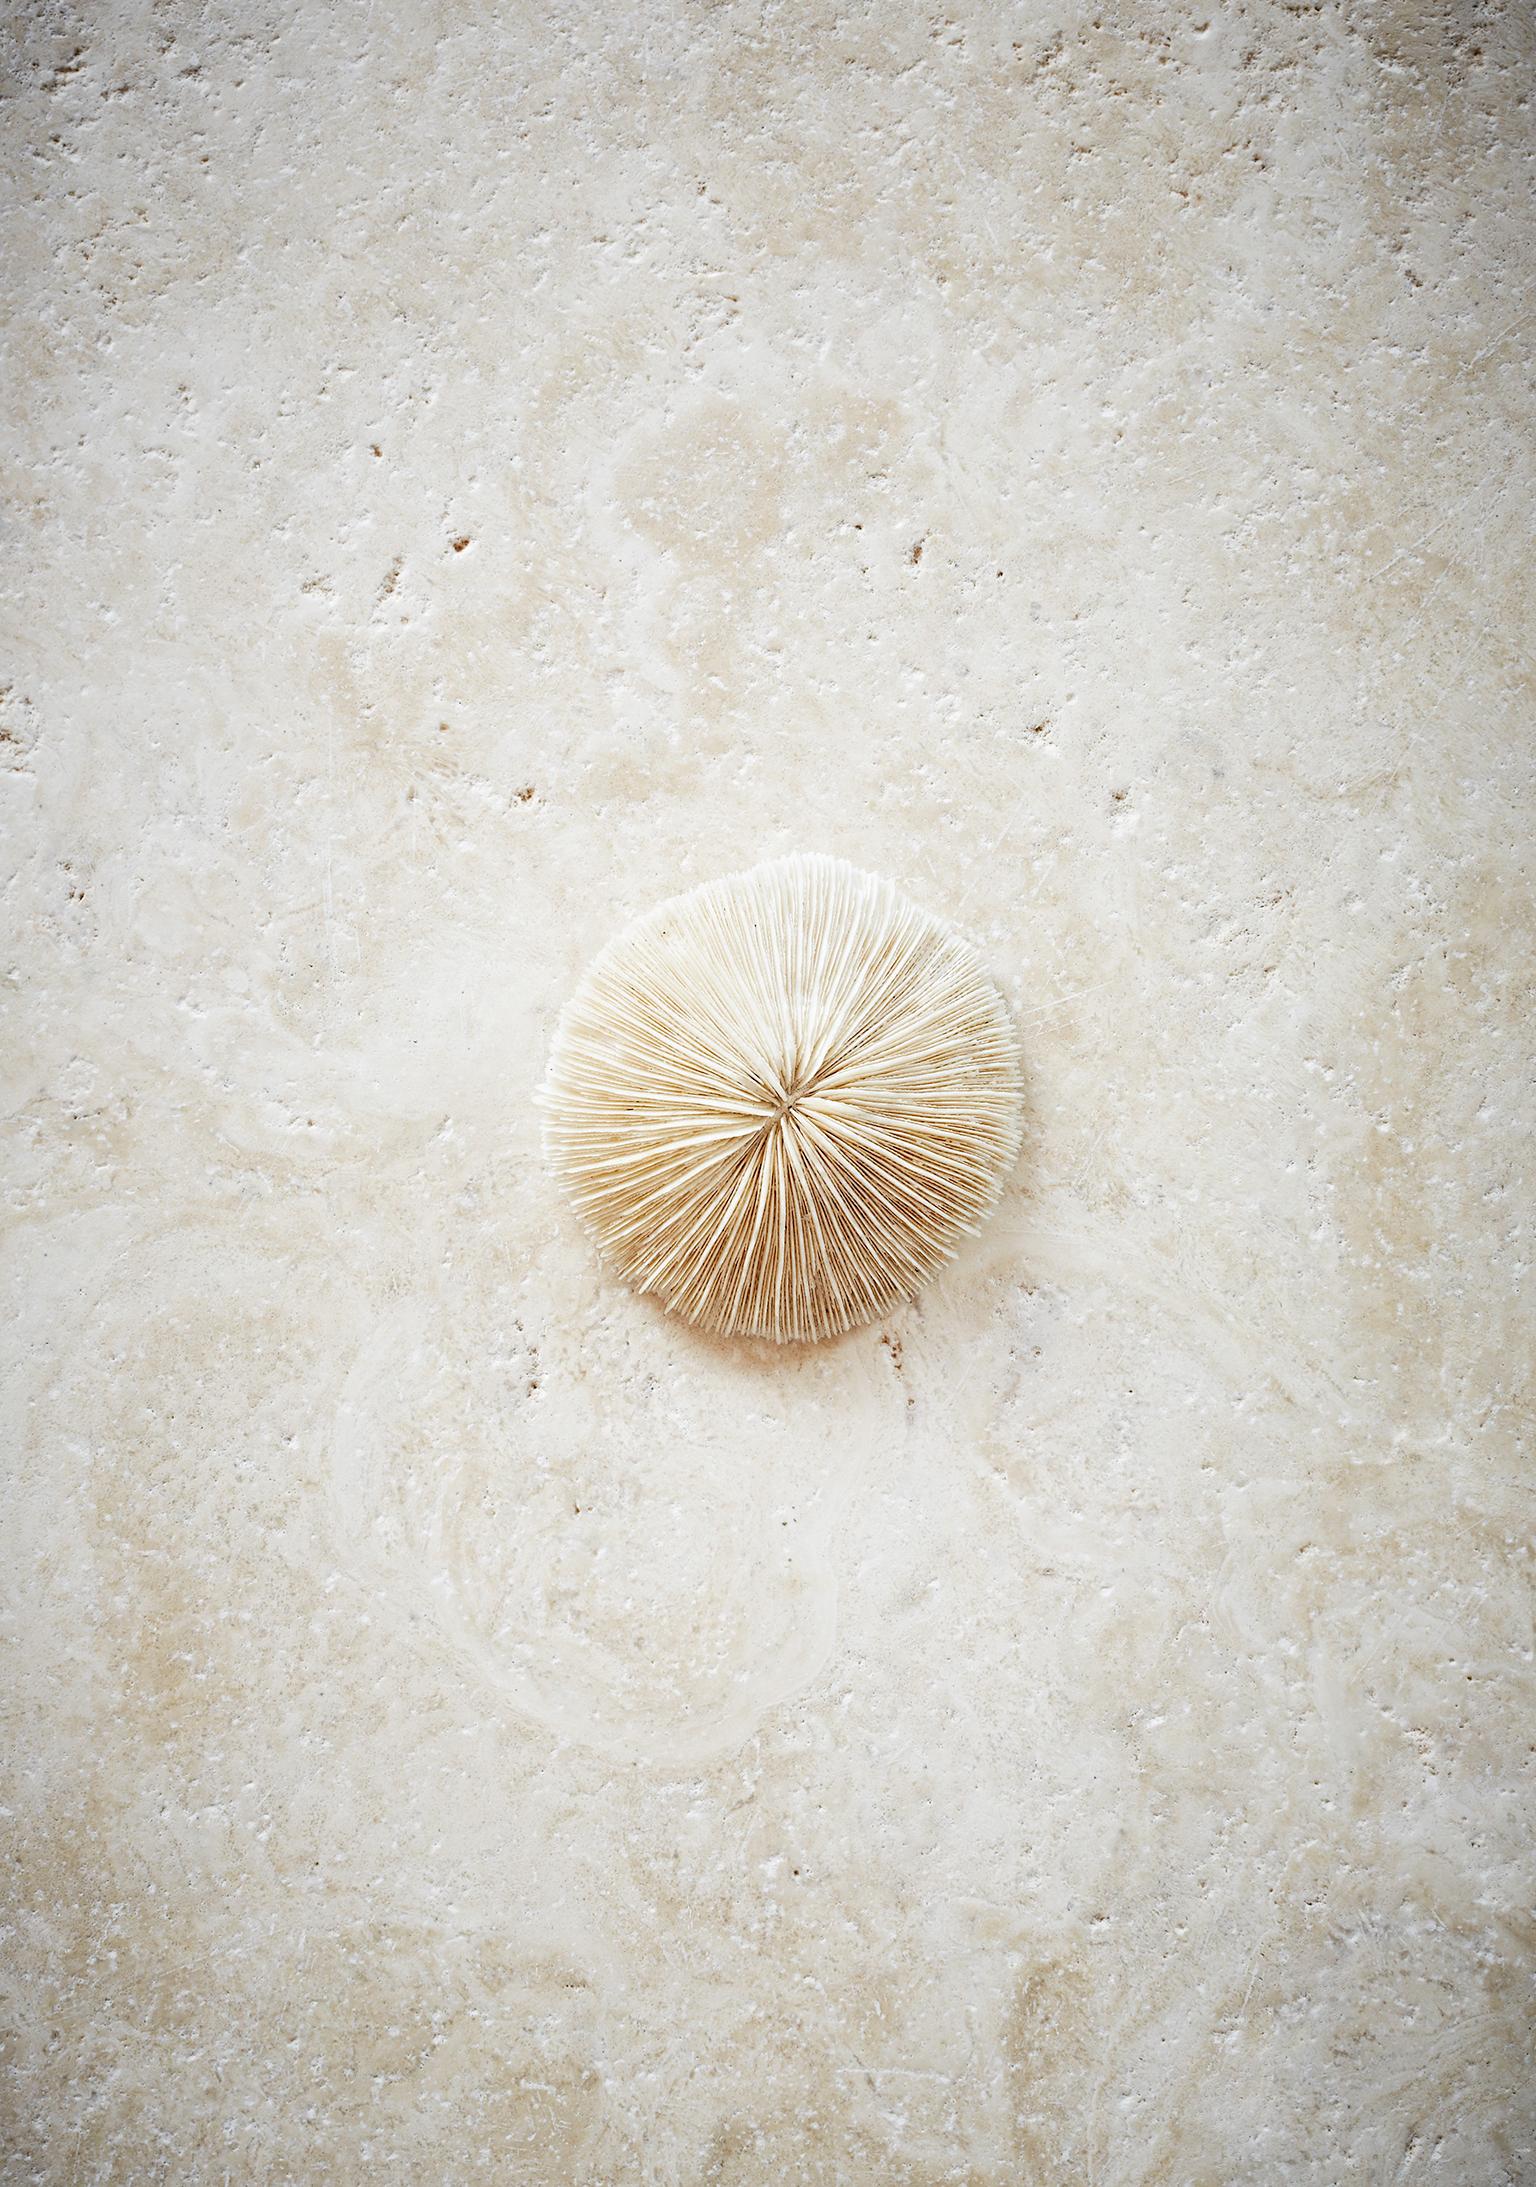 Caren Alpert photograph of a white sea urchin on a natural sandstone background. “Sea Life” is printed on archival, full color photographic paper. This size is 11” x 14”. Available in three sizes (unframed): 11” x 14”, 16” x 20”, 24” x 36”. Custom